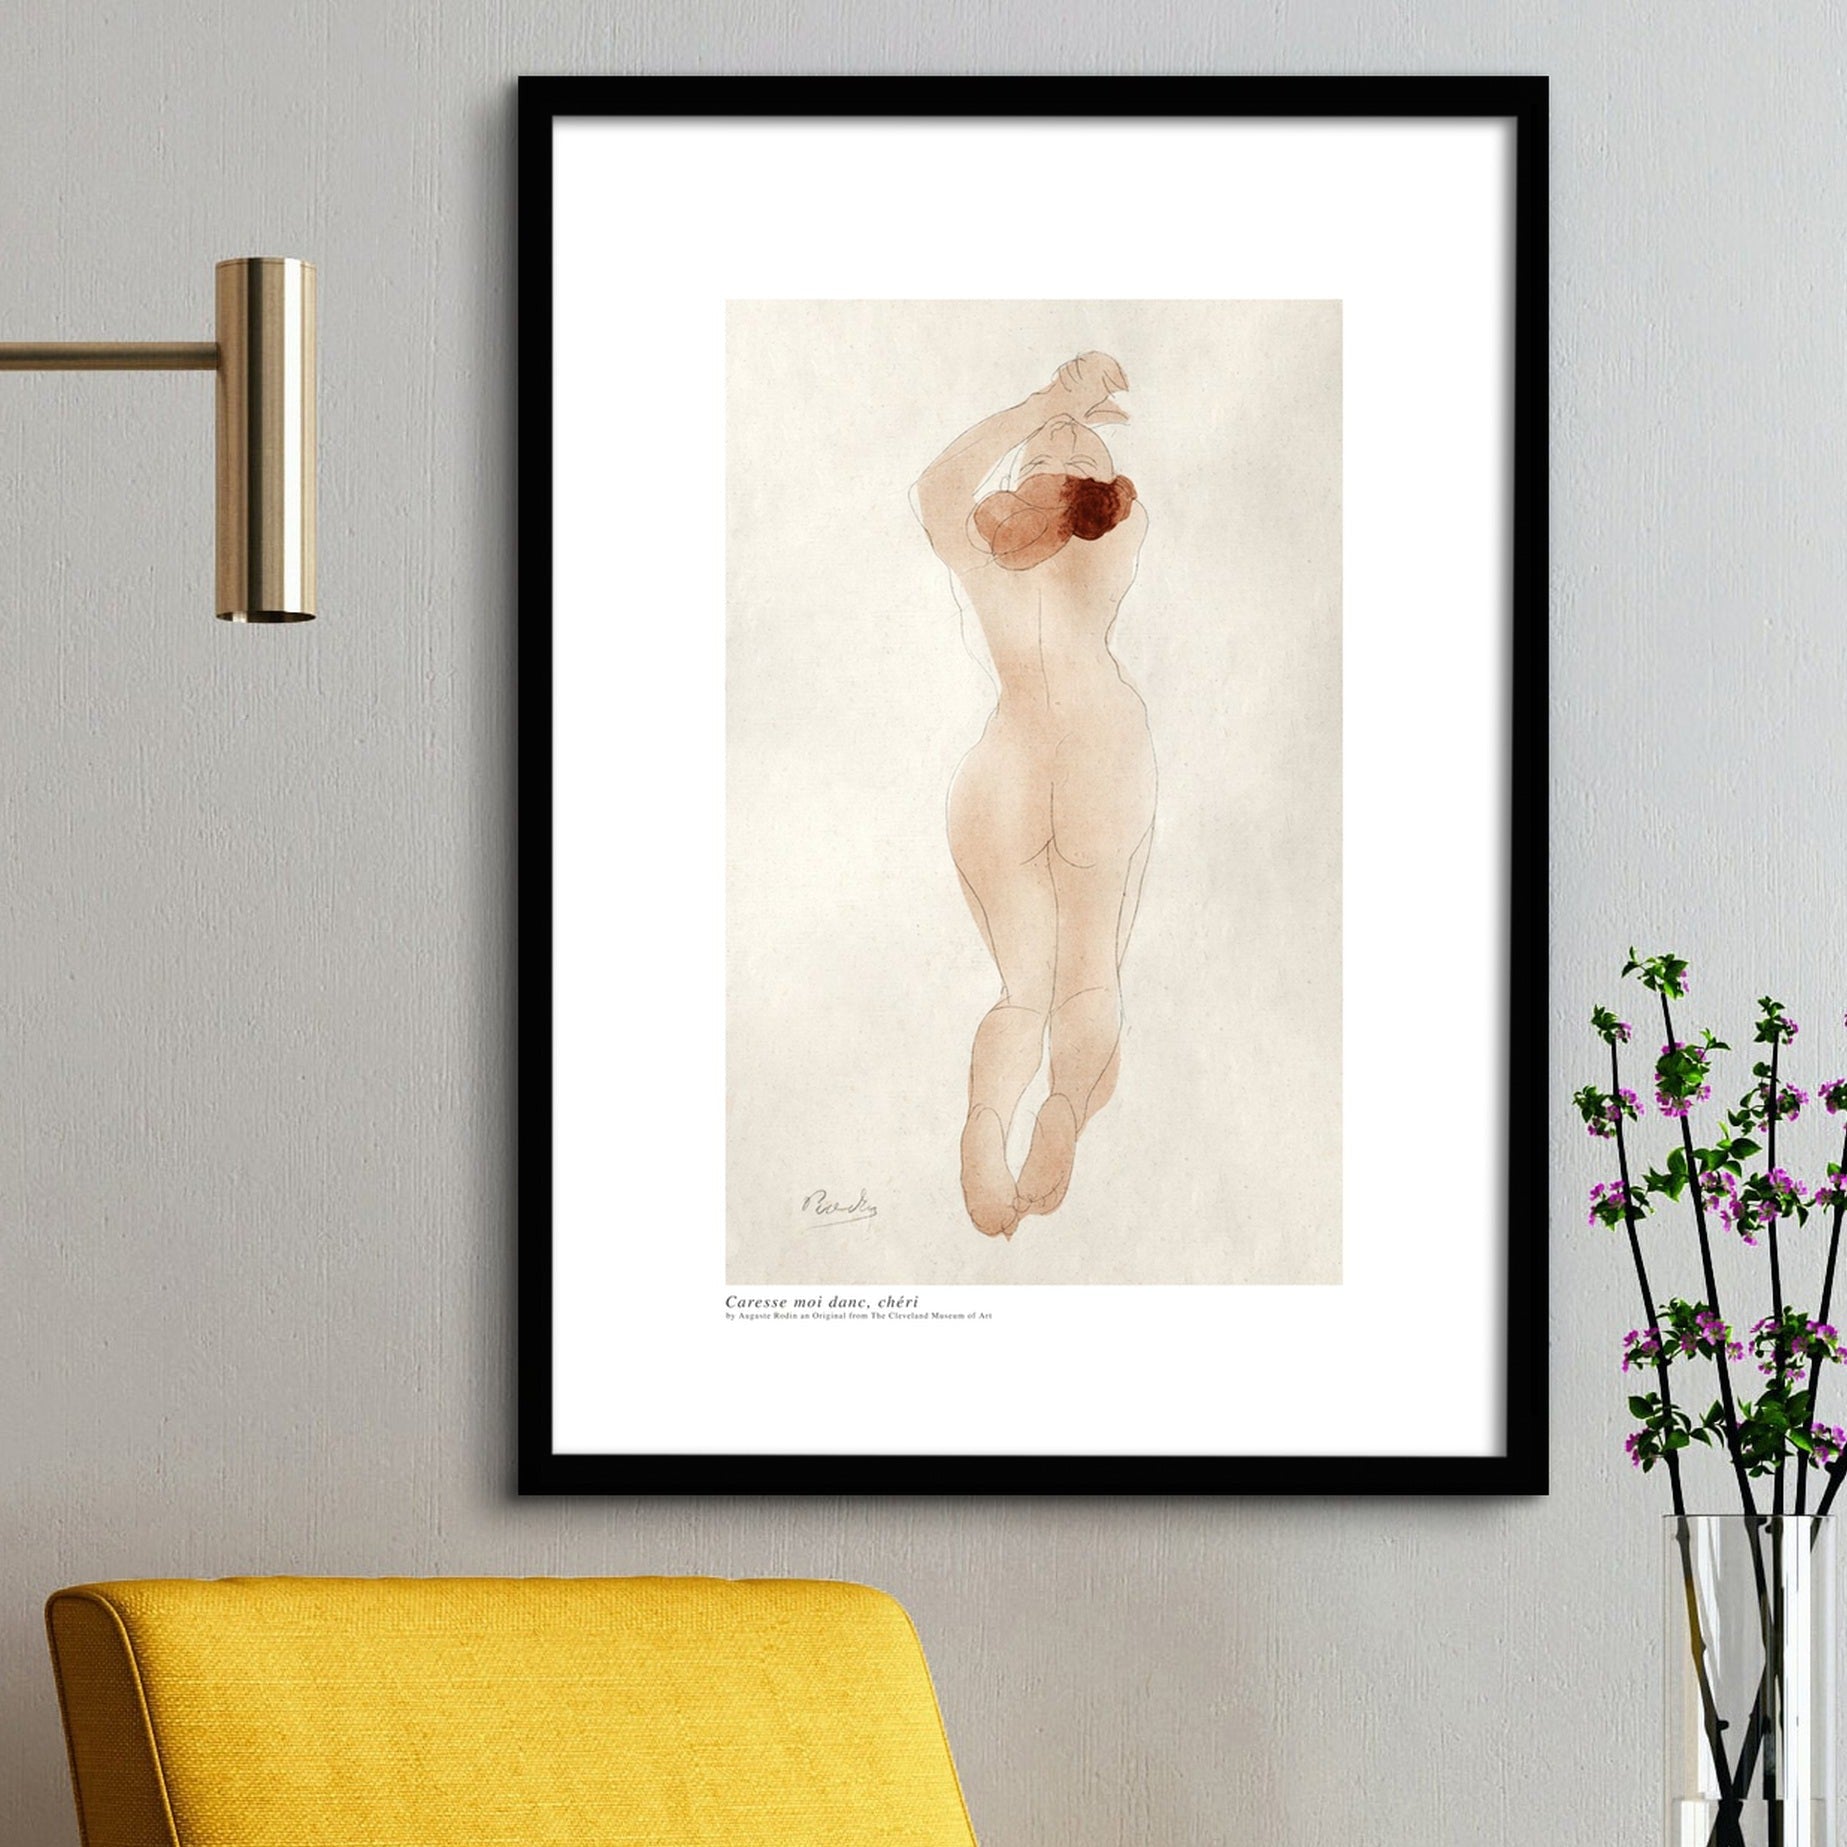 Poster preview. Watercolor nude study by Auguste Rodin